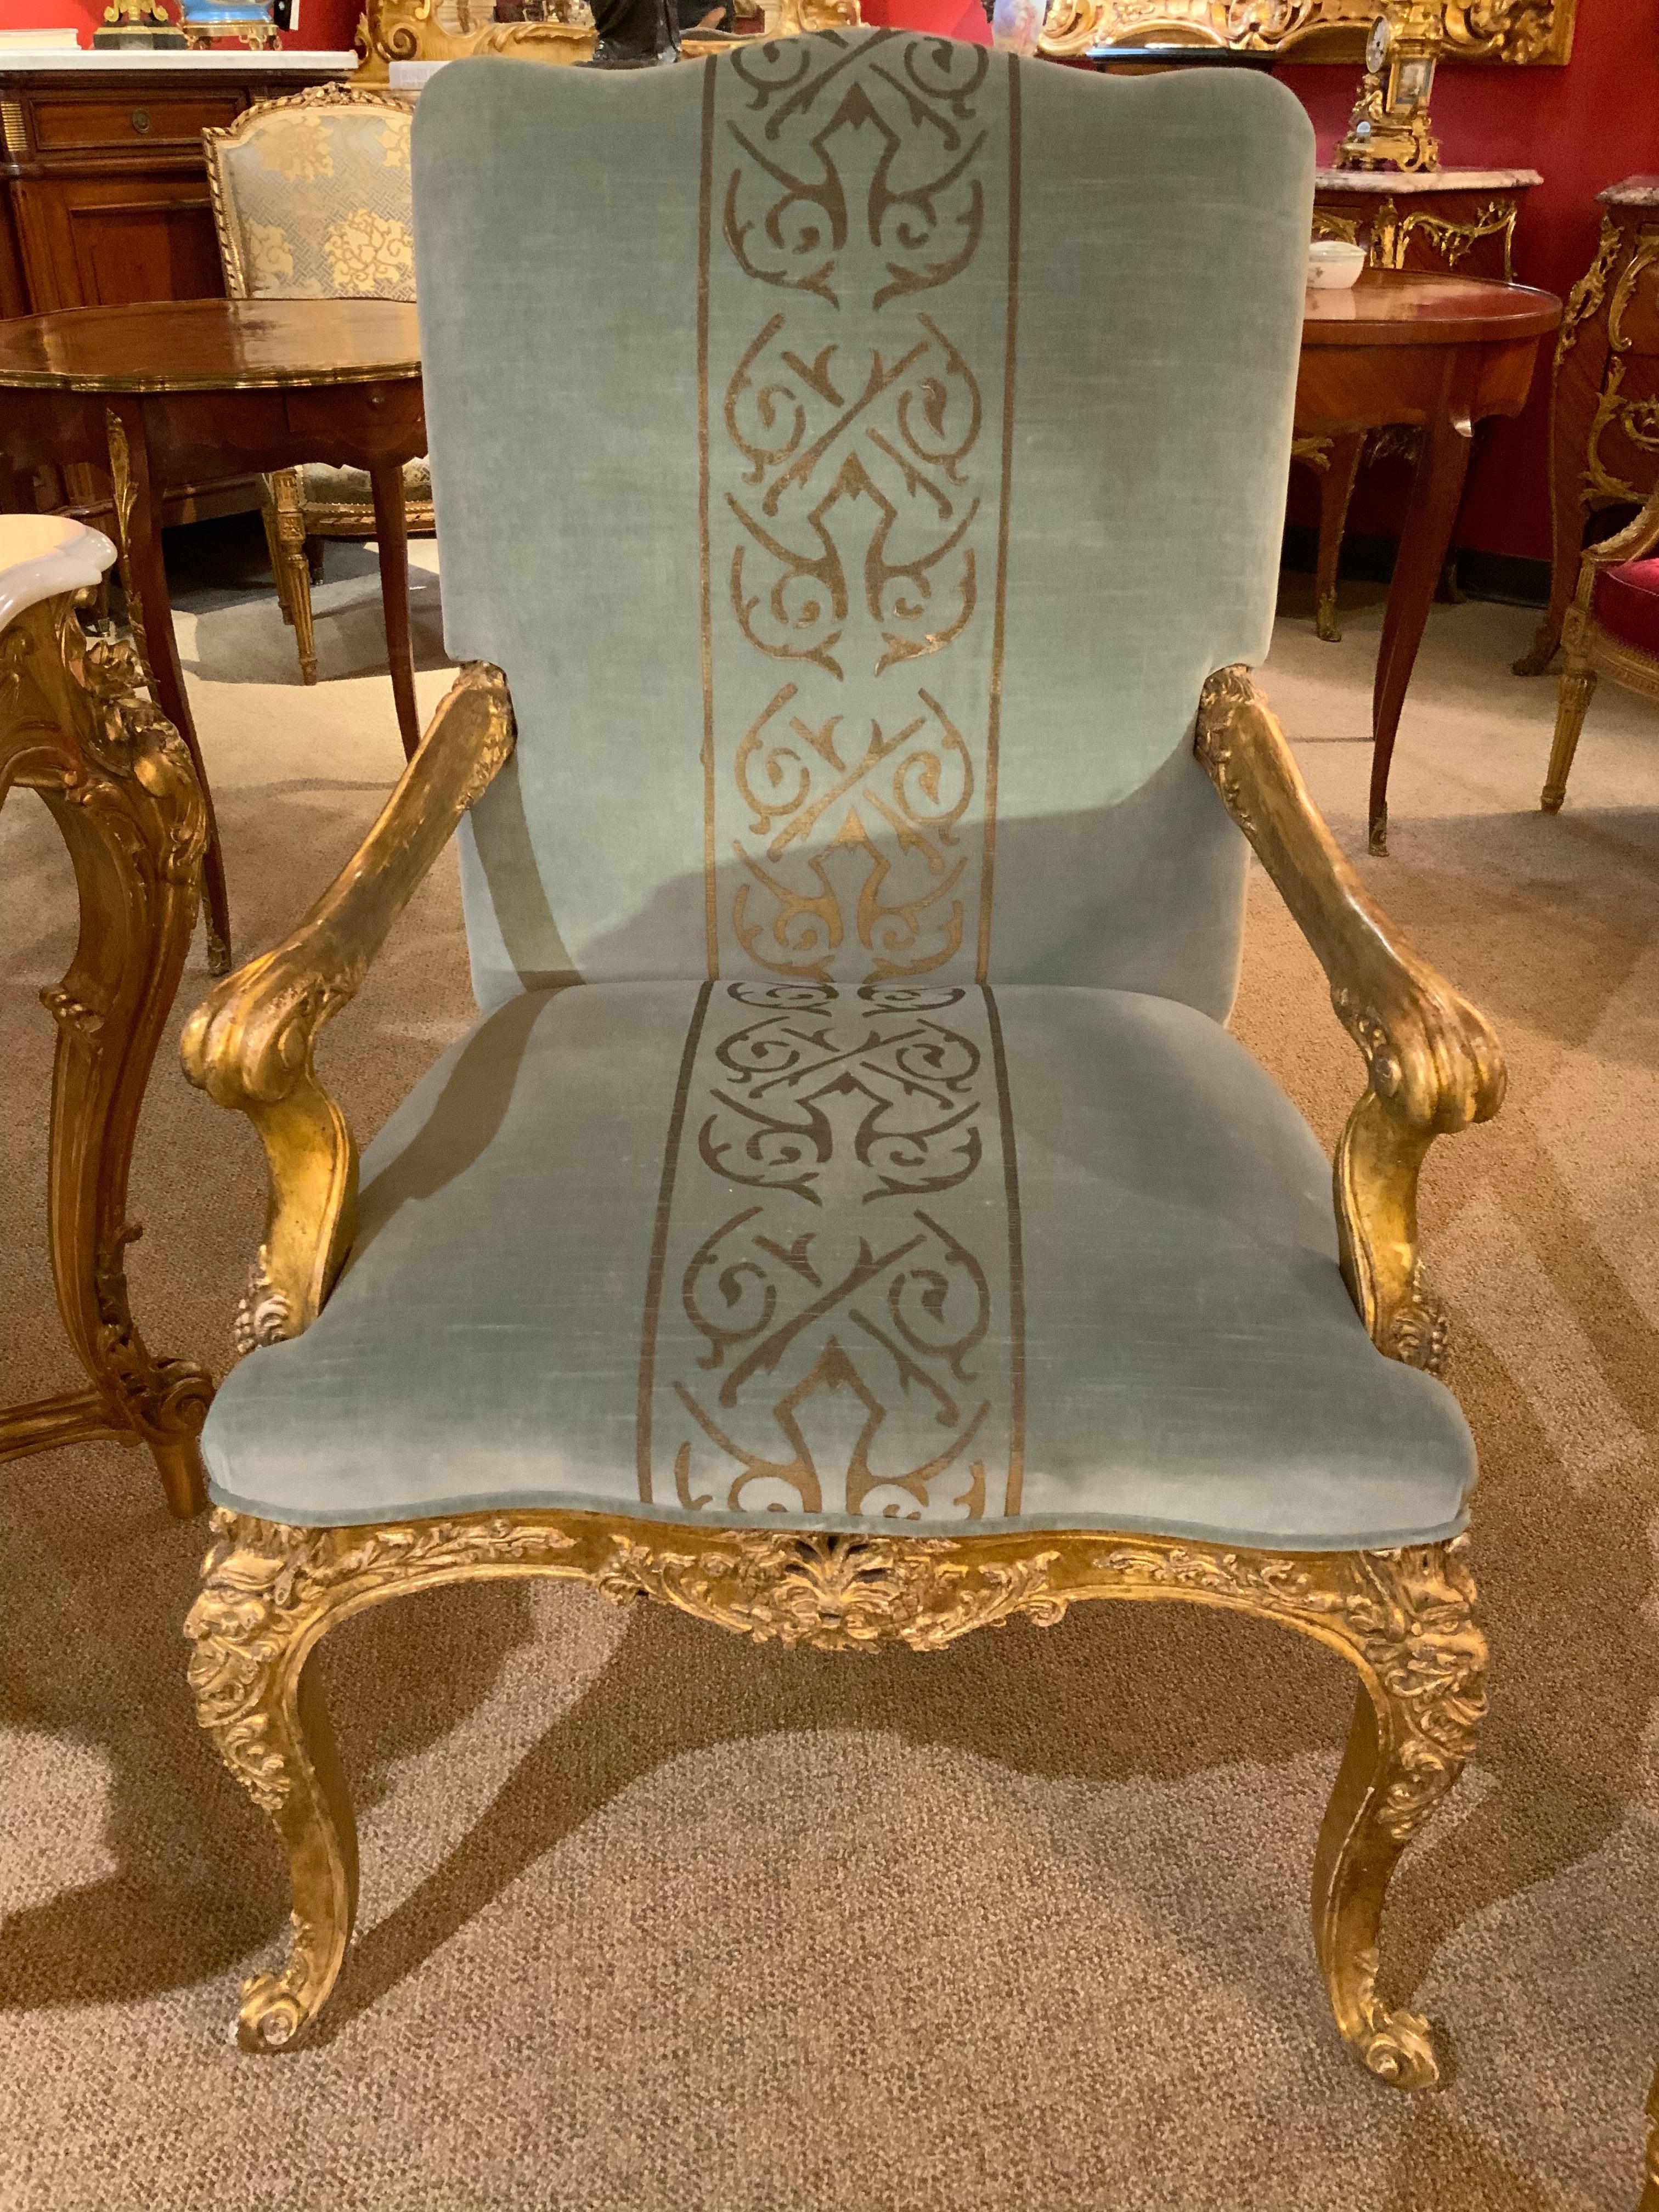 Pair of Giltwood Arm Chairs, Louis XV-Style Upholstered in Pale Aqua Blue /Gold 6